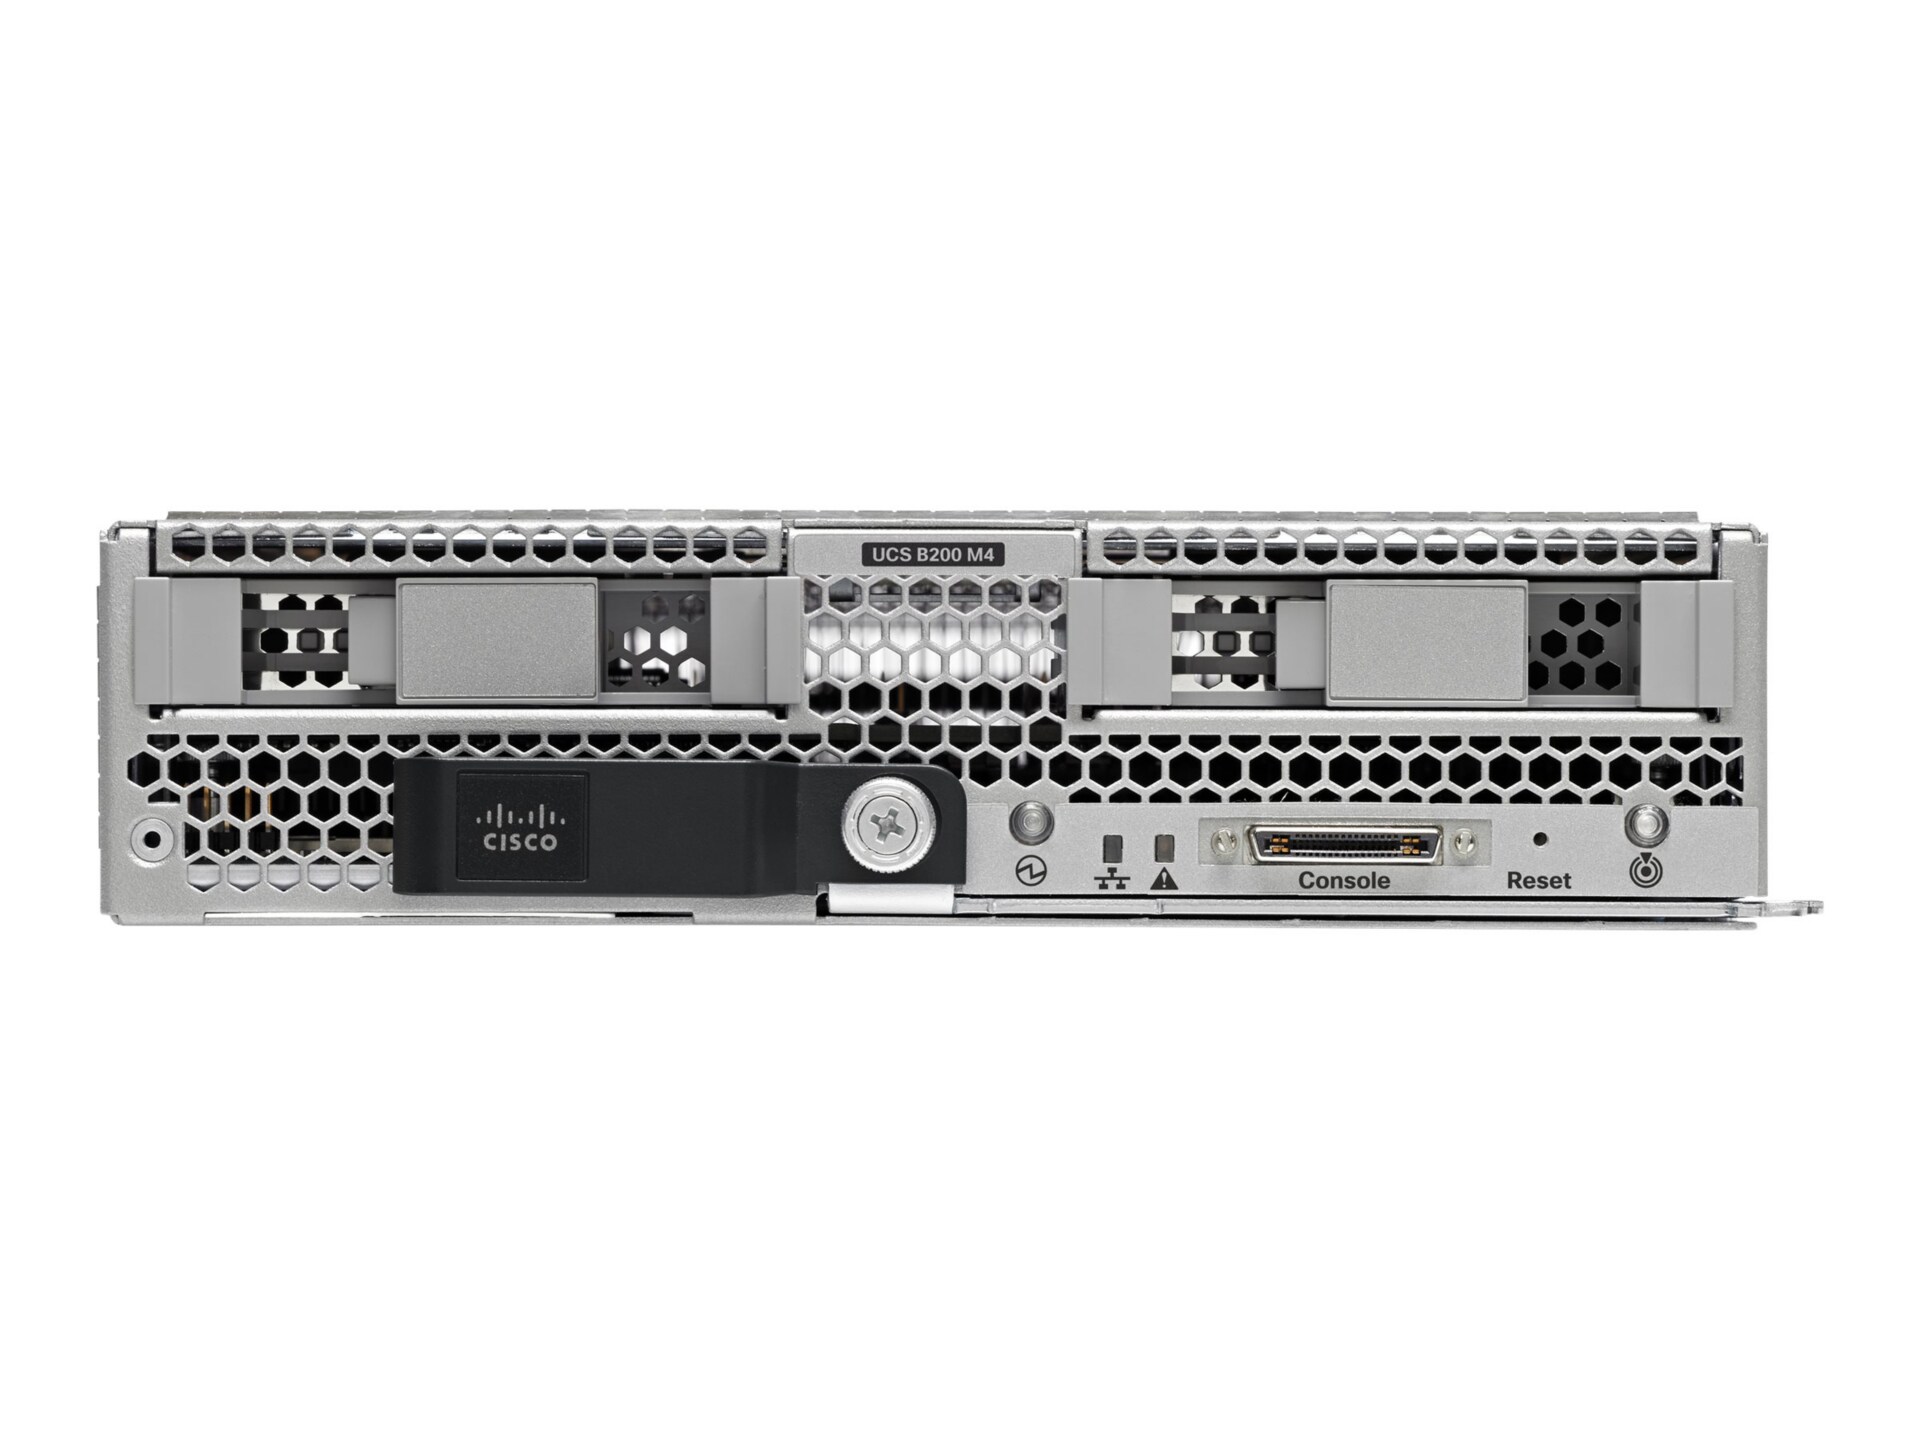 Cisco UCS SmartPlay Select B200 M4 High Core 1 (Not sold Standalone ) - blade - Xeon E5-2683V4 2.1 GHz - 256 GB - no HDD